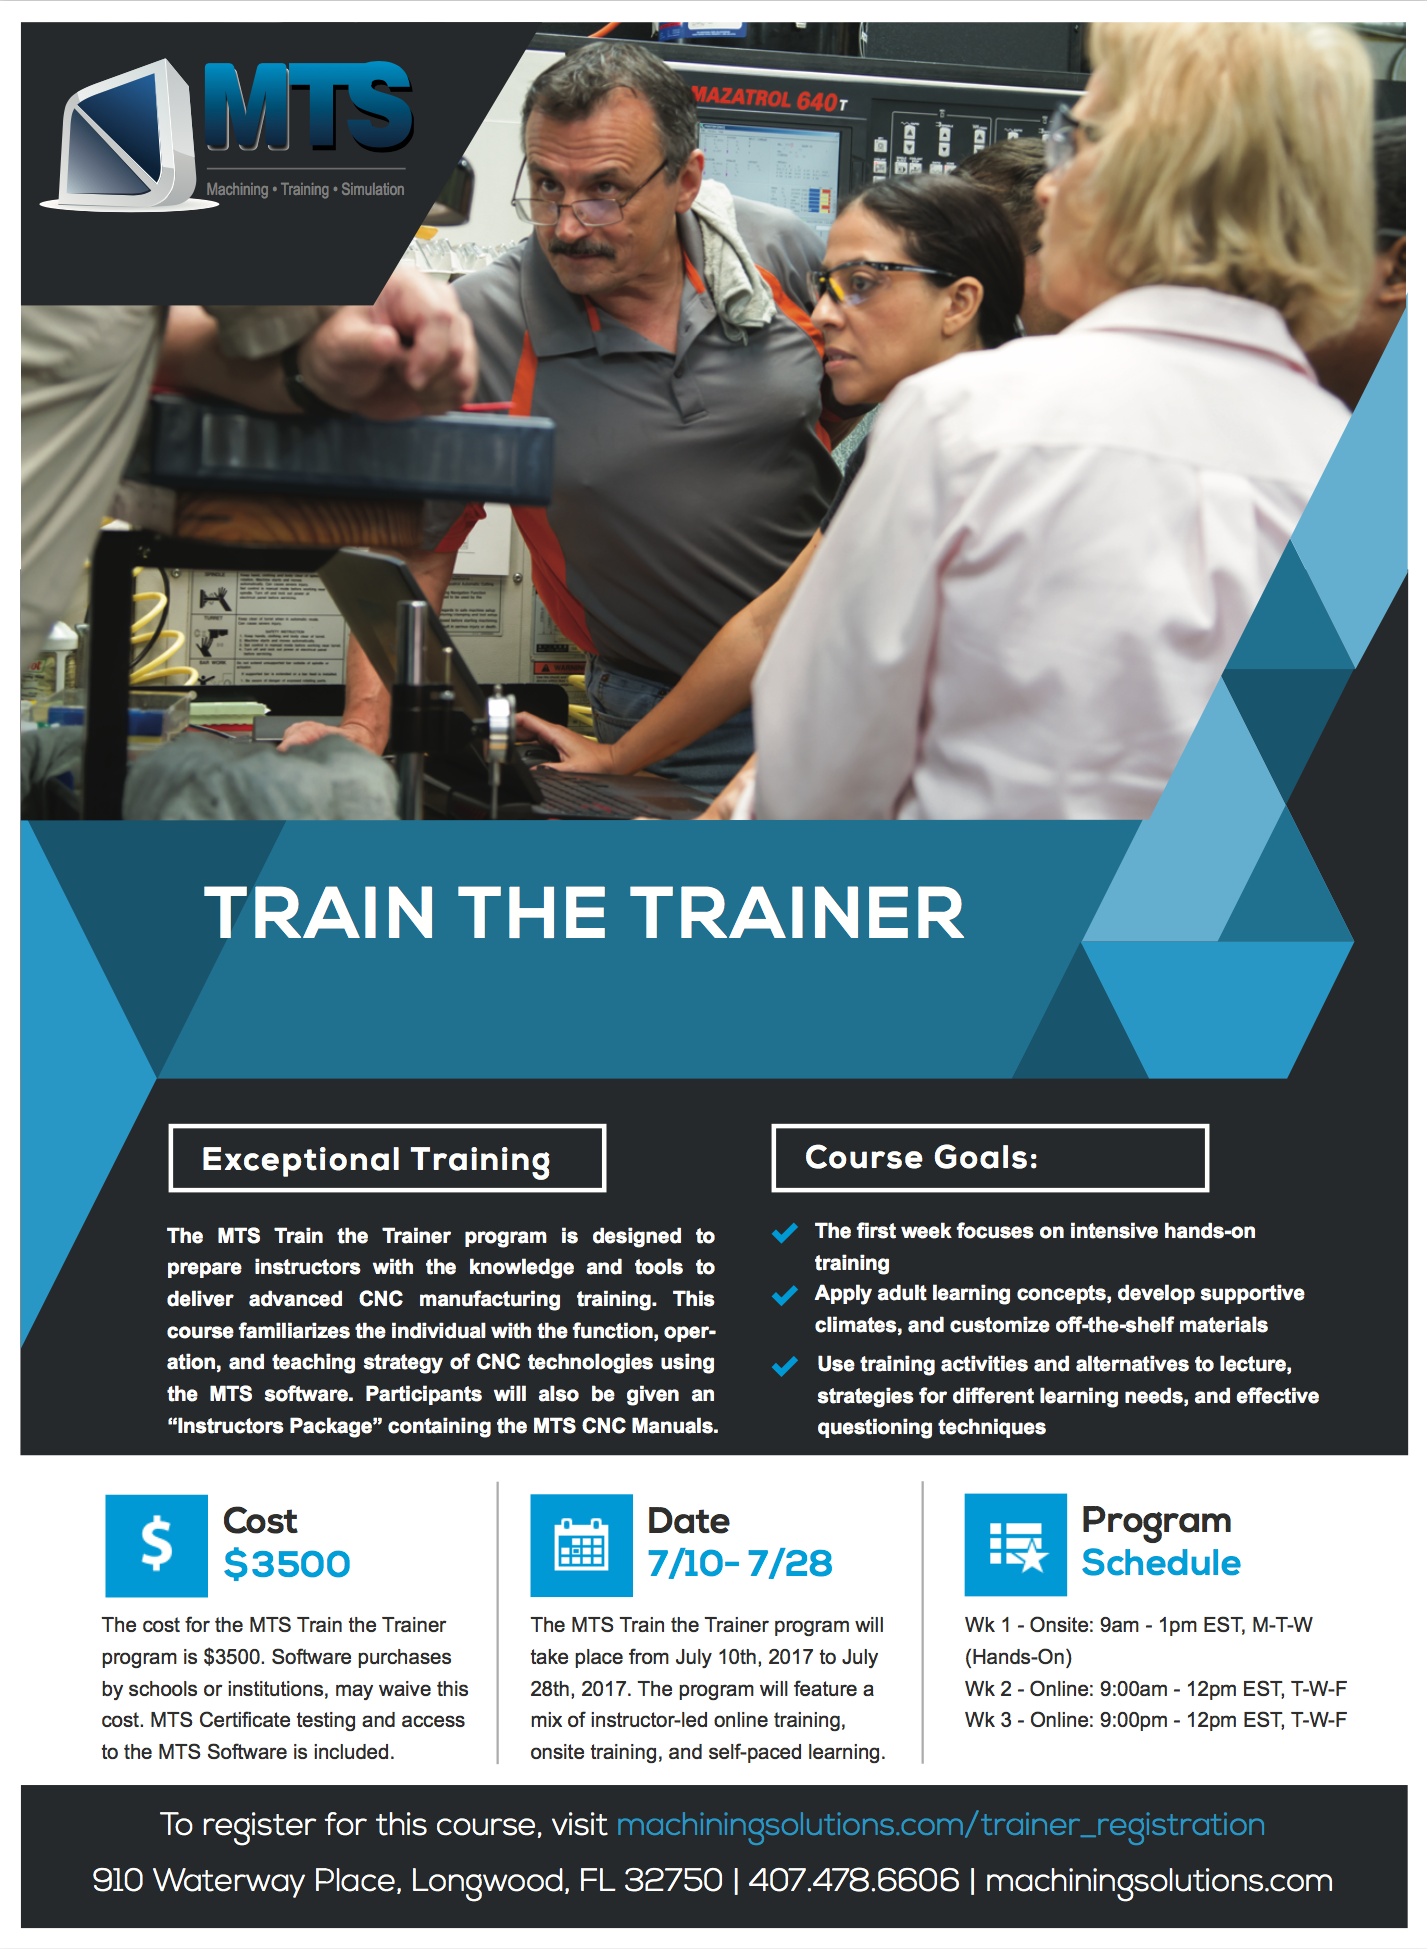 Train the Trainer Flyer